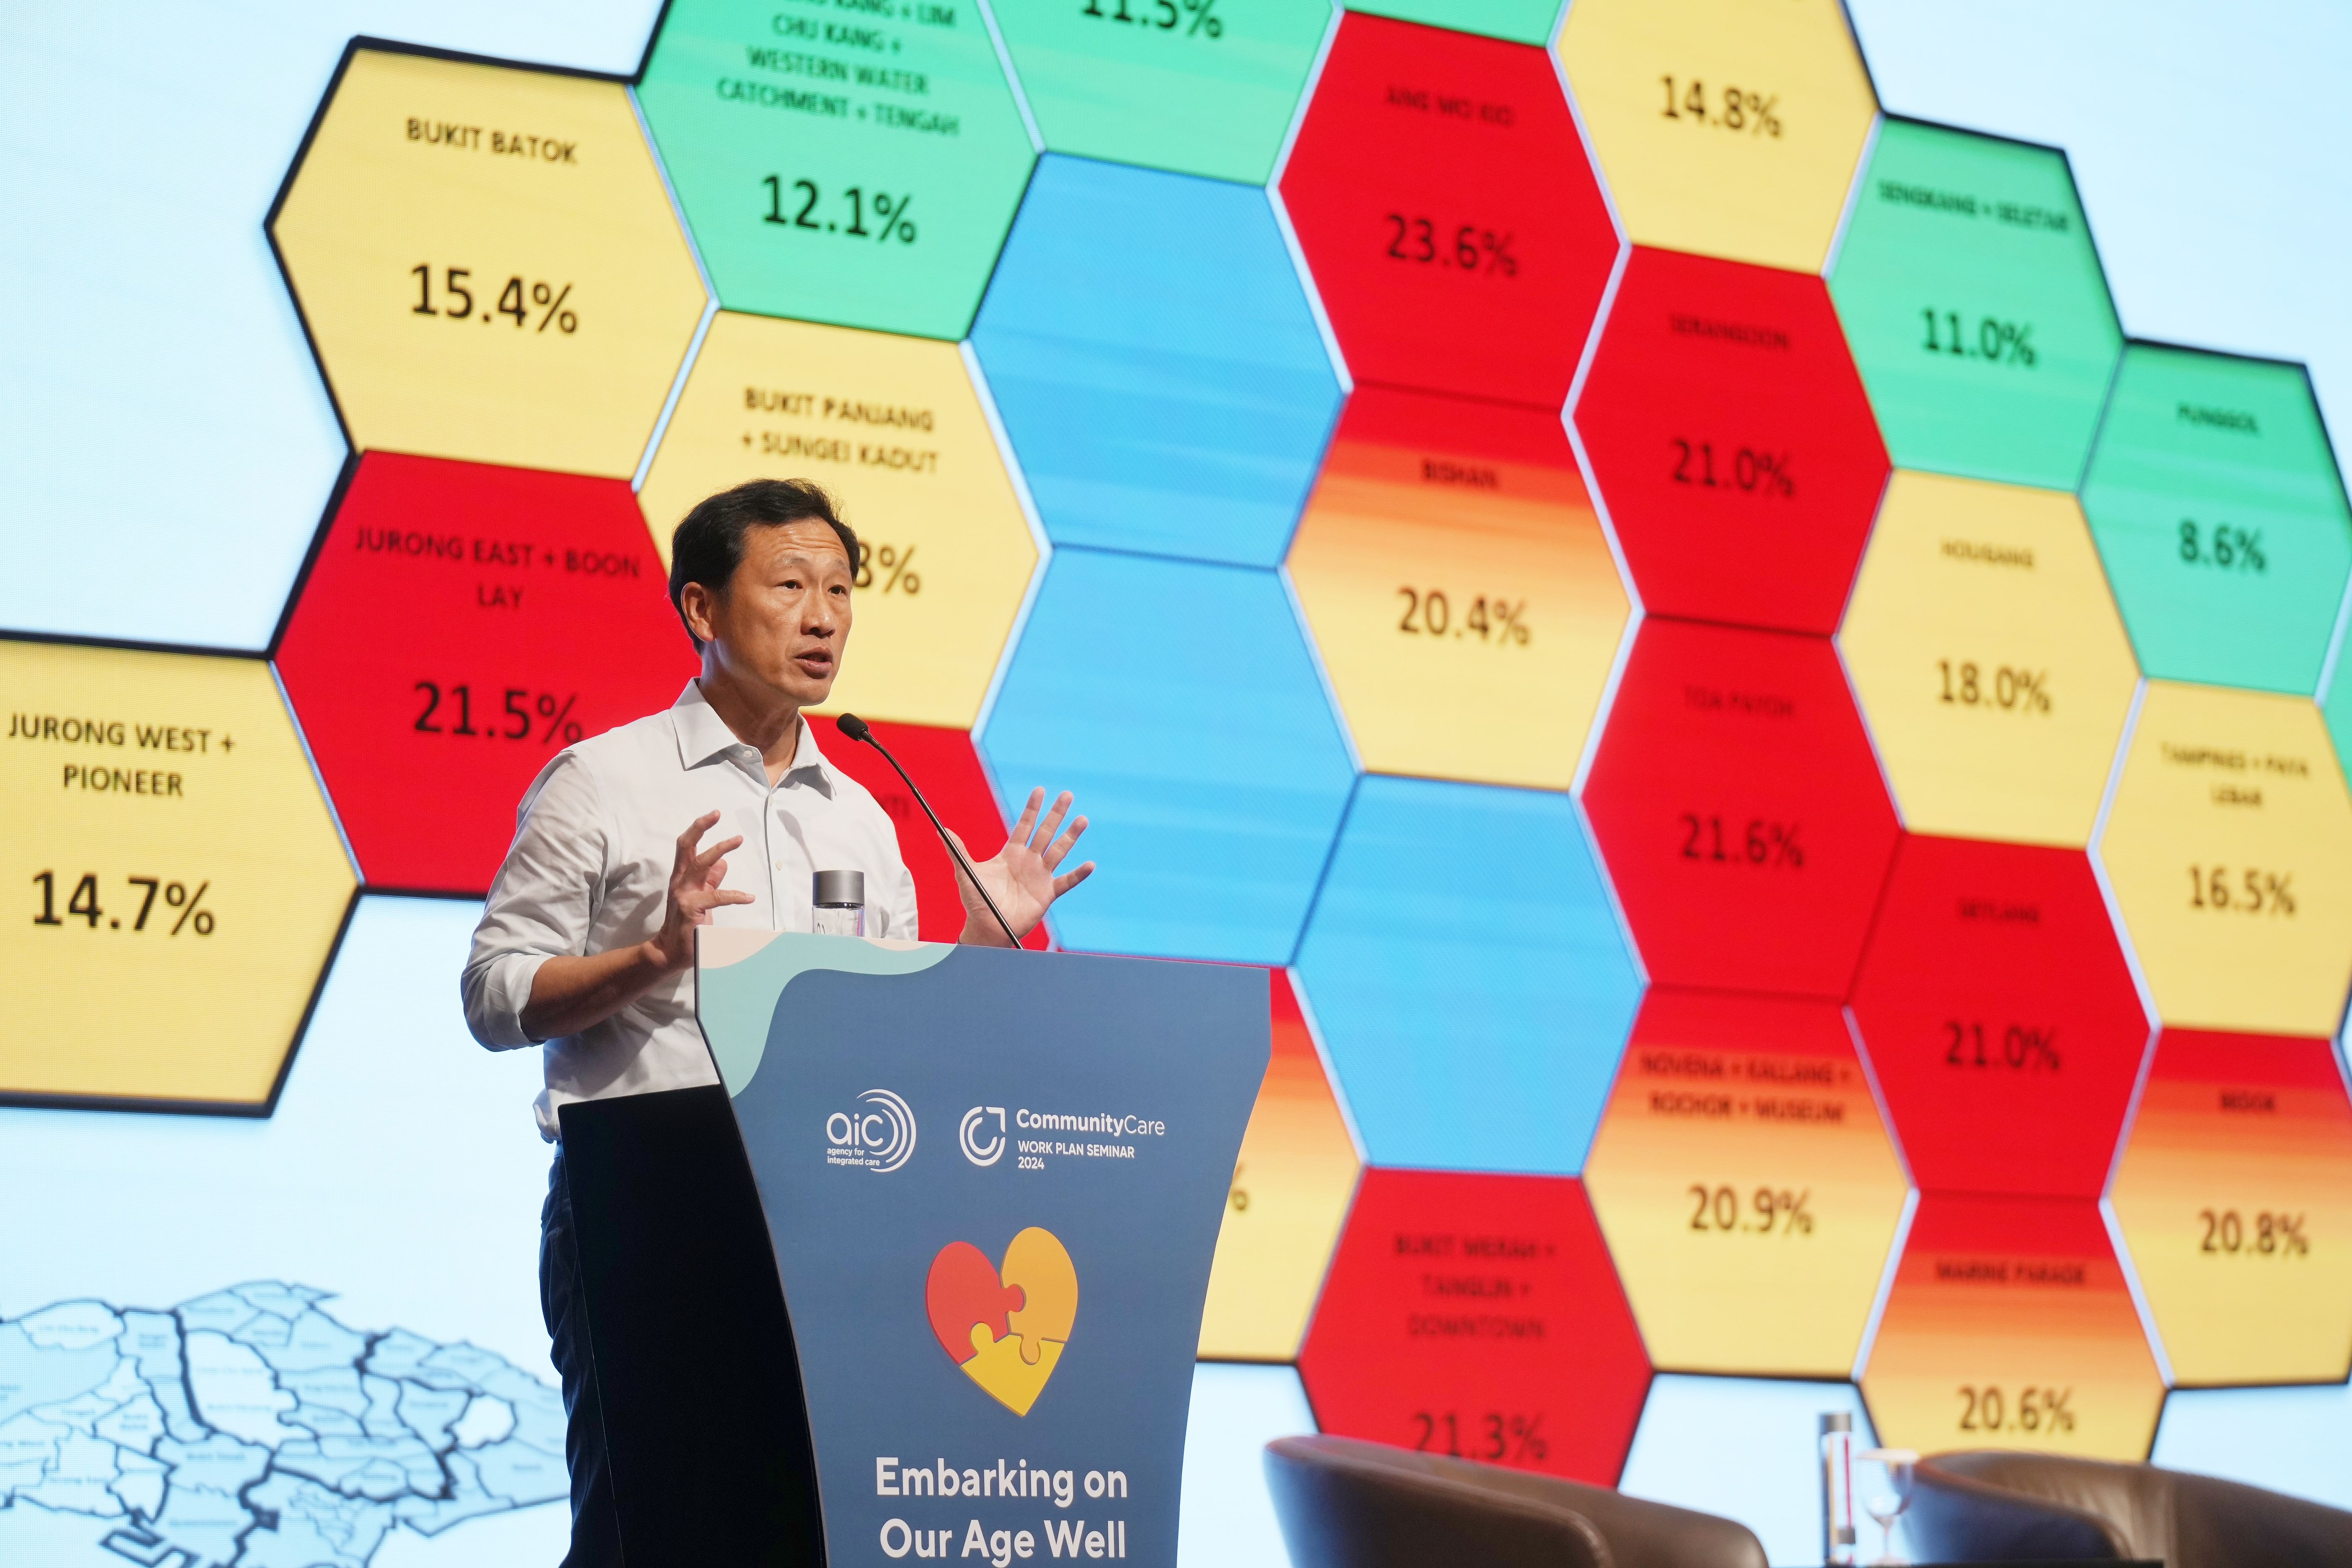 ‘We’ll belanja you’: Ong Ye Kung urges better outreach, interesting activities to engage seniors